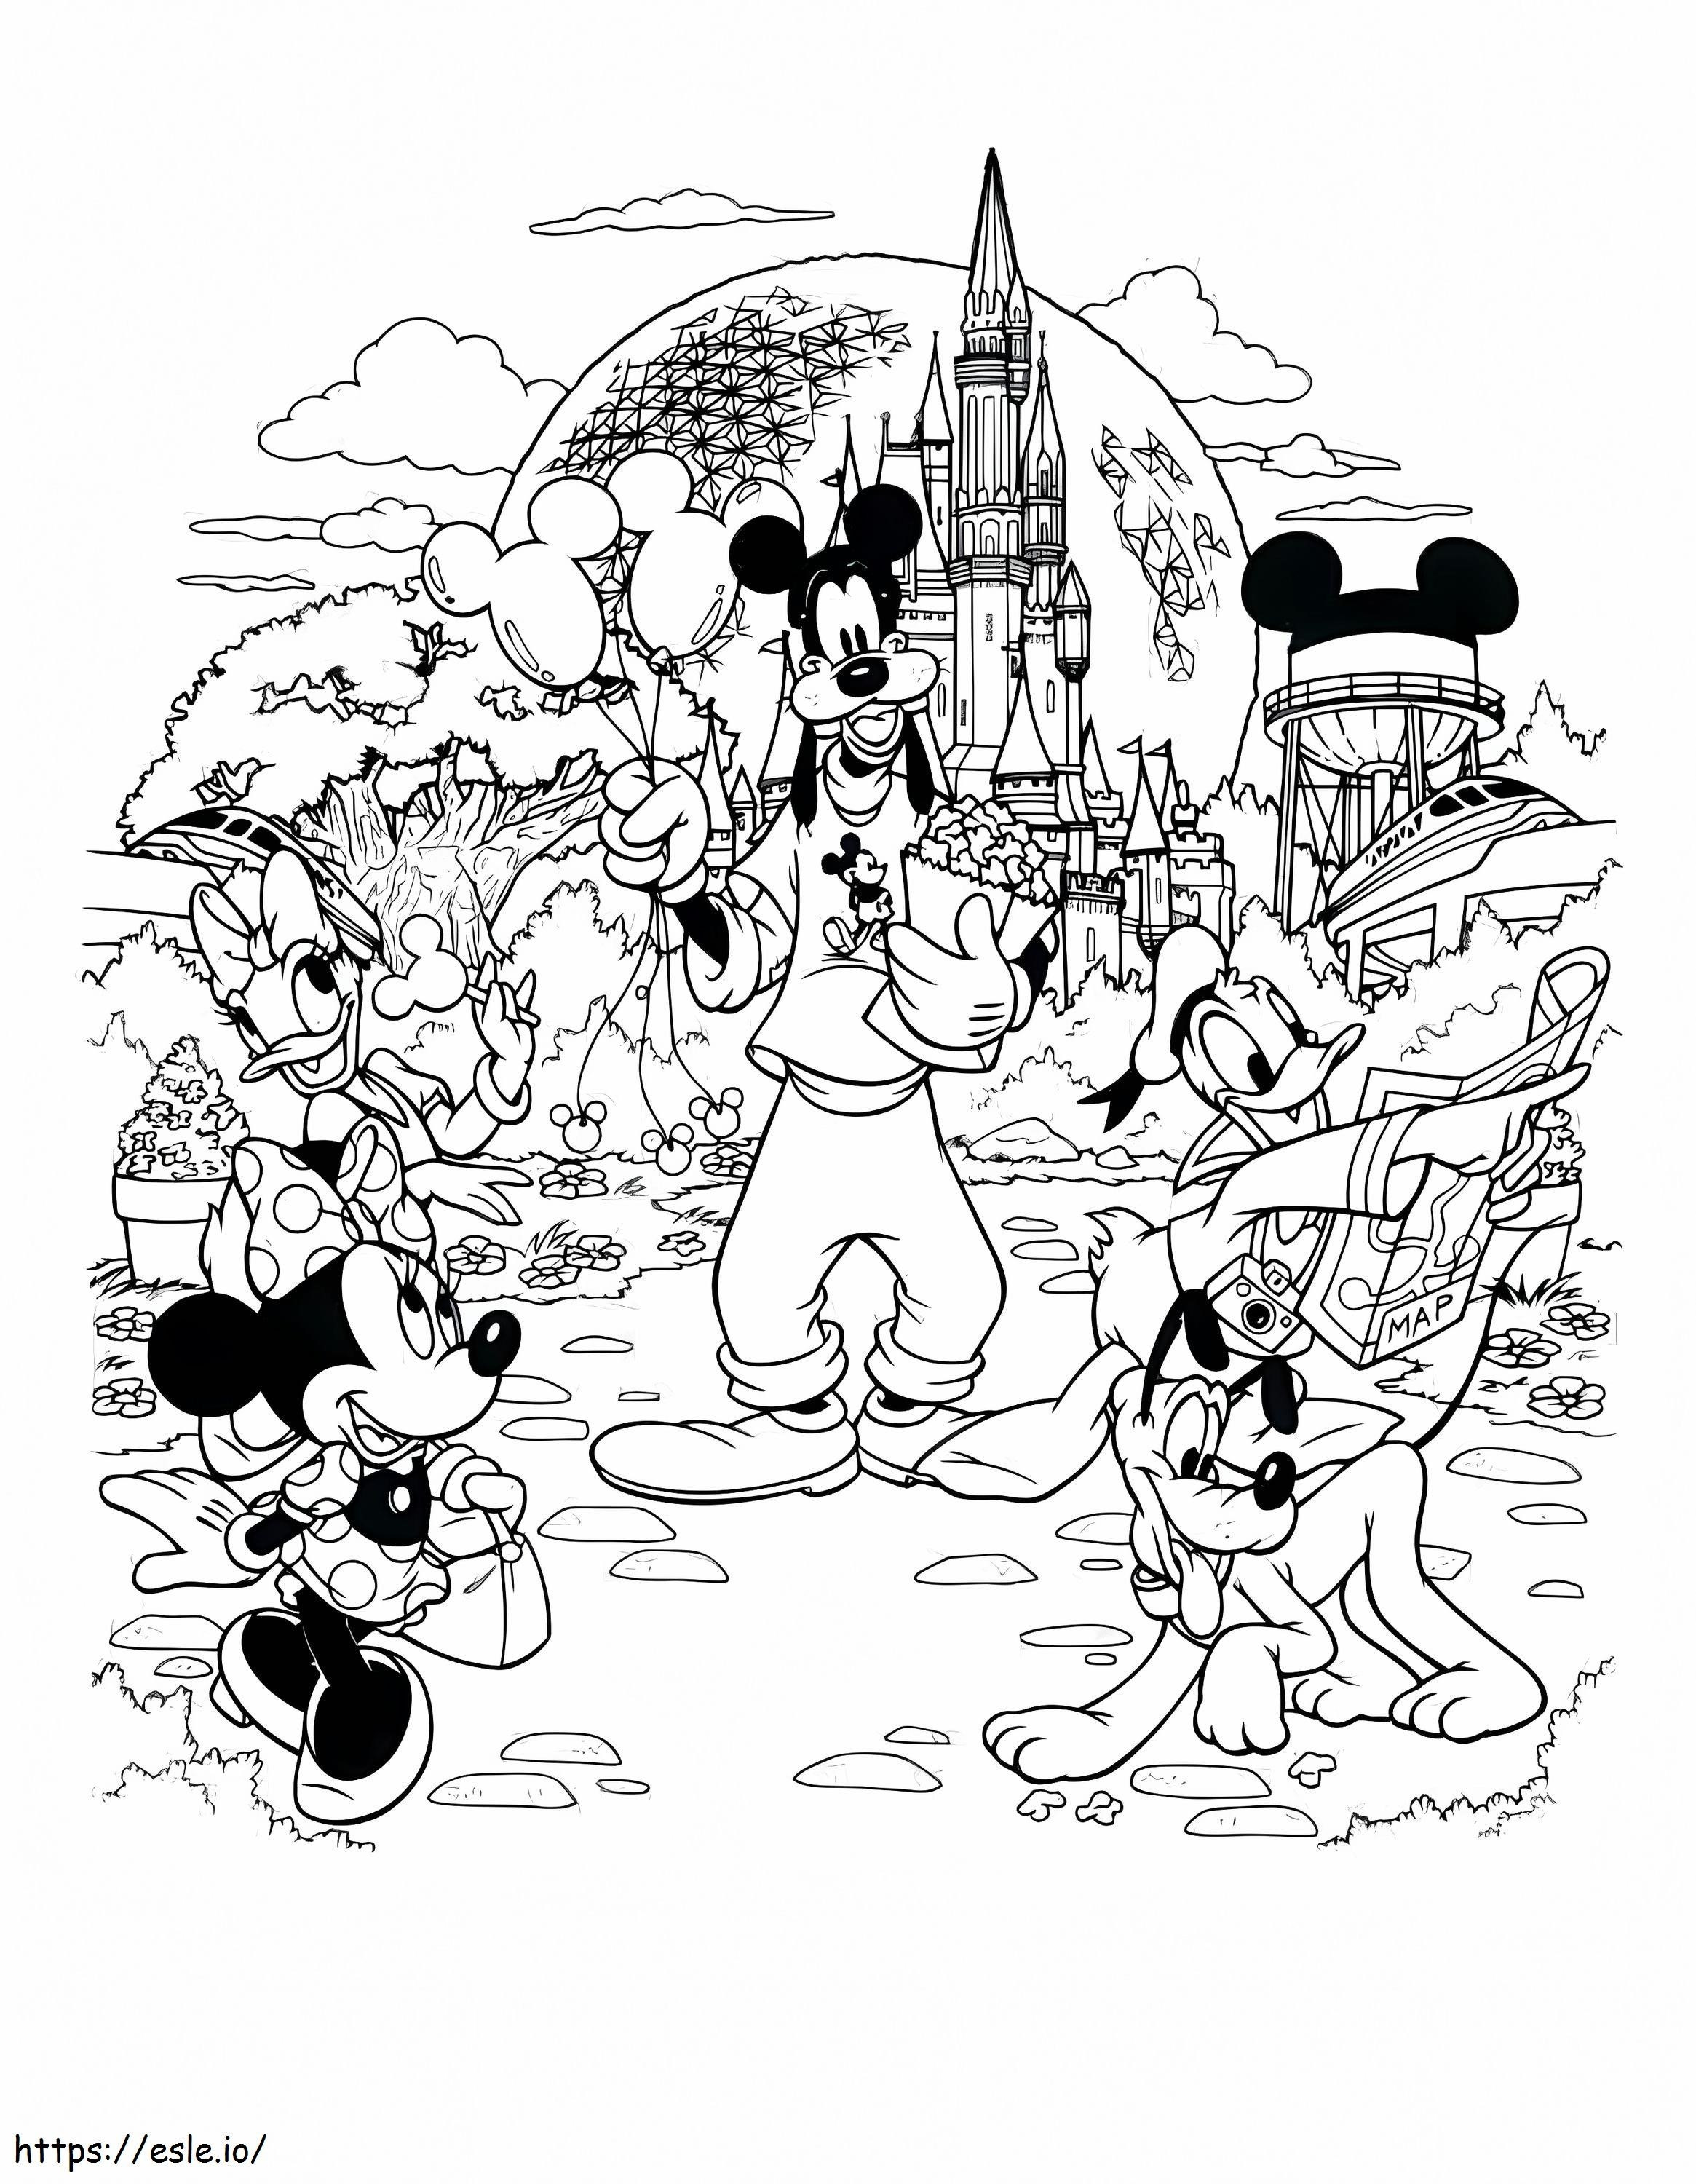 Cute Disney Characters coloring page